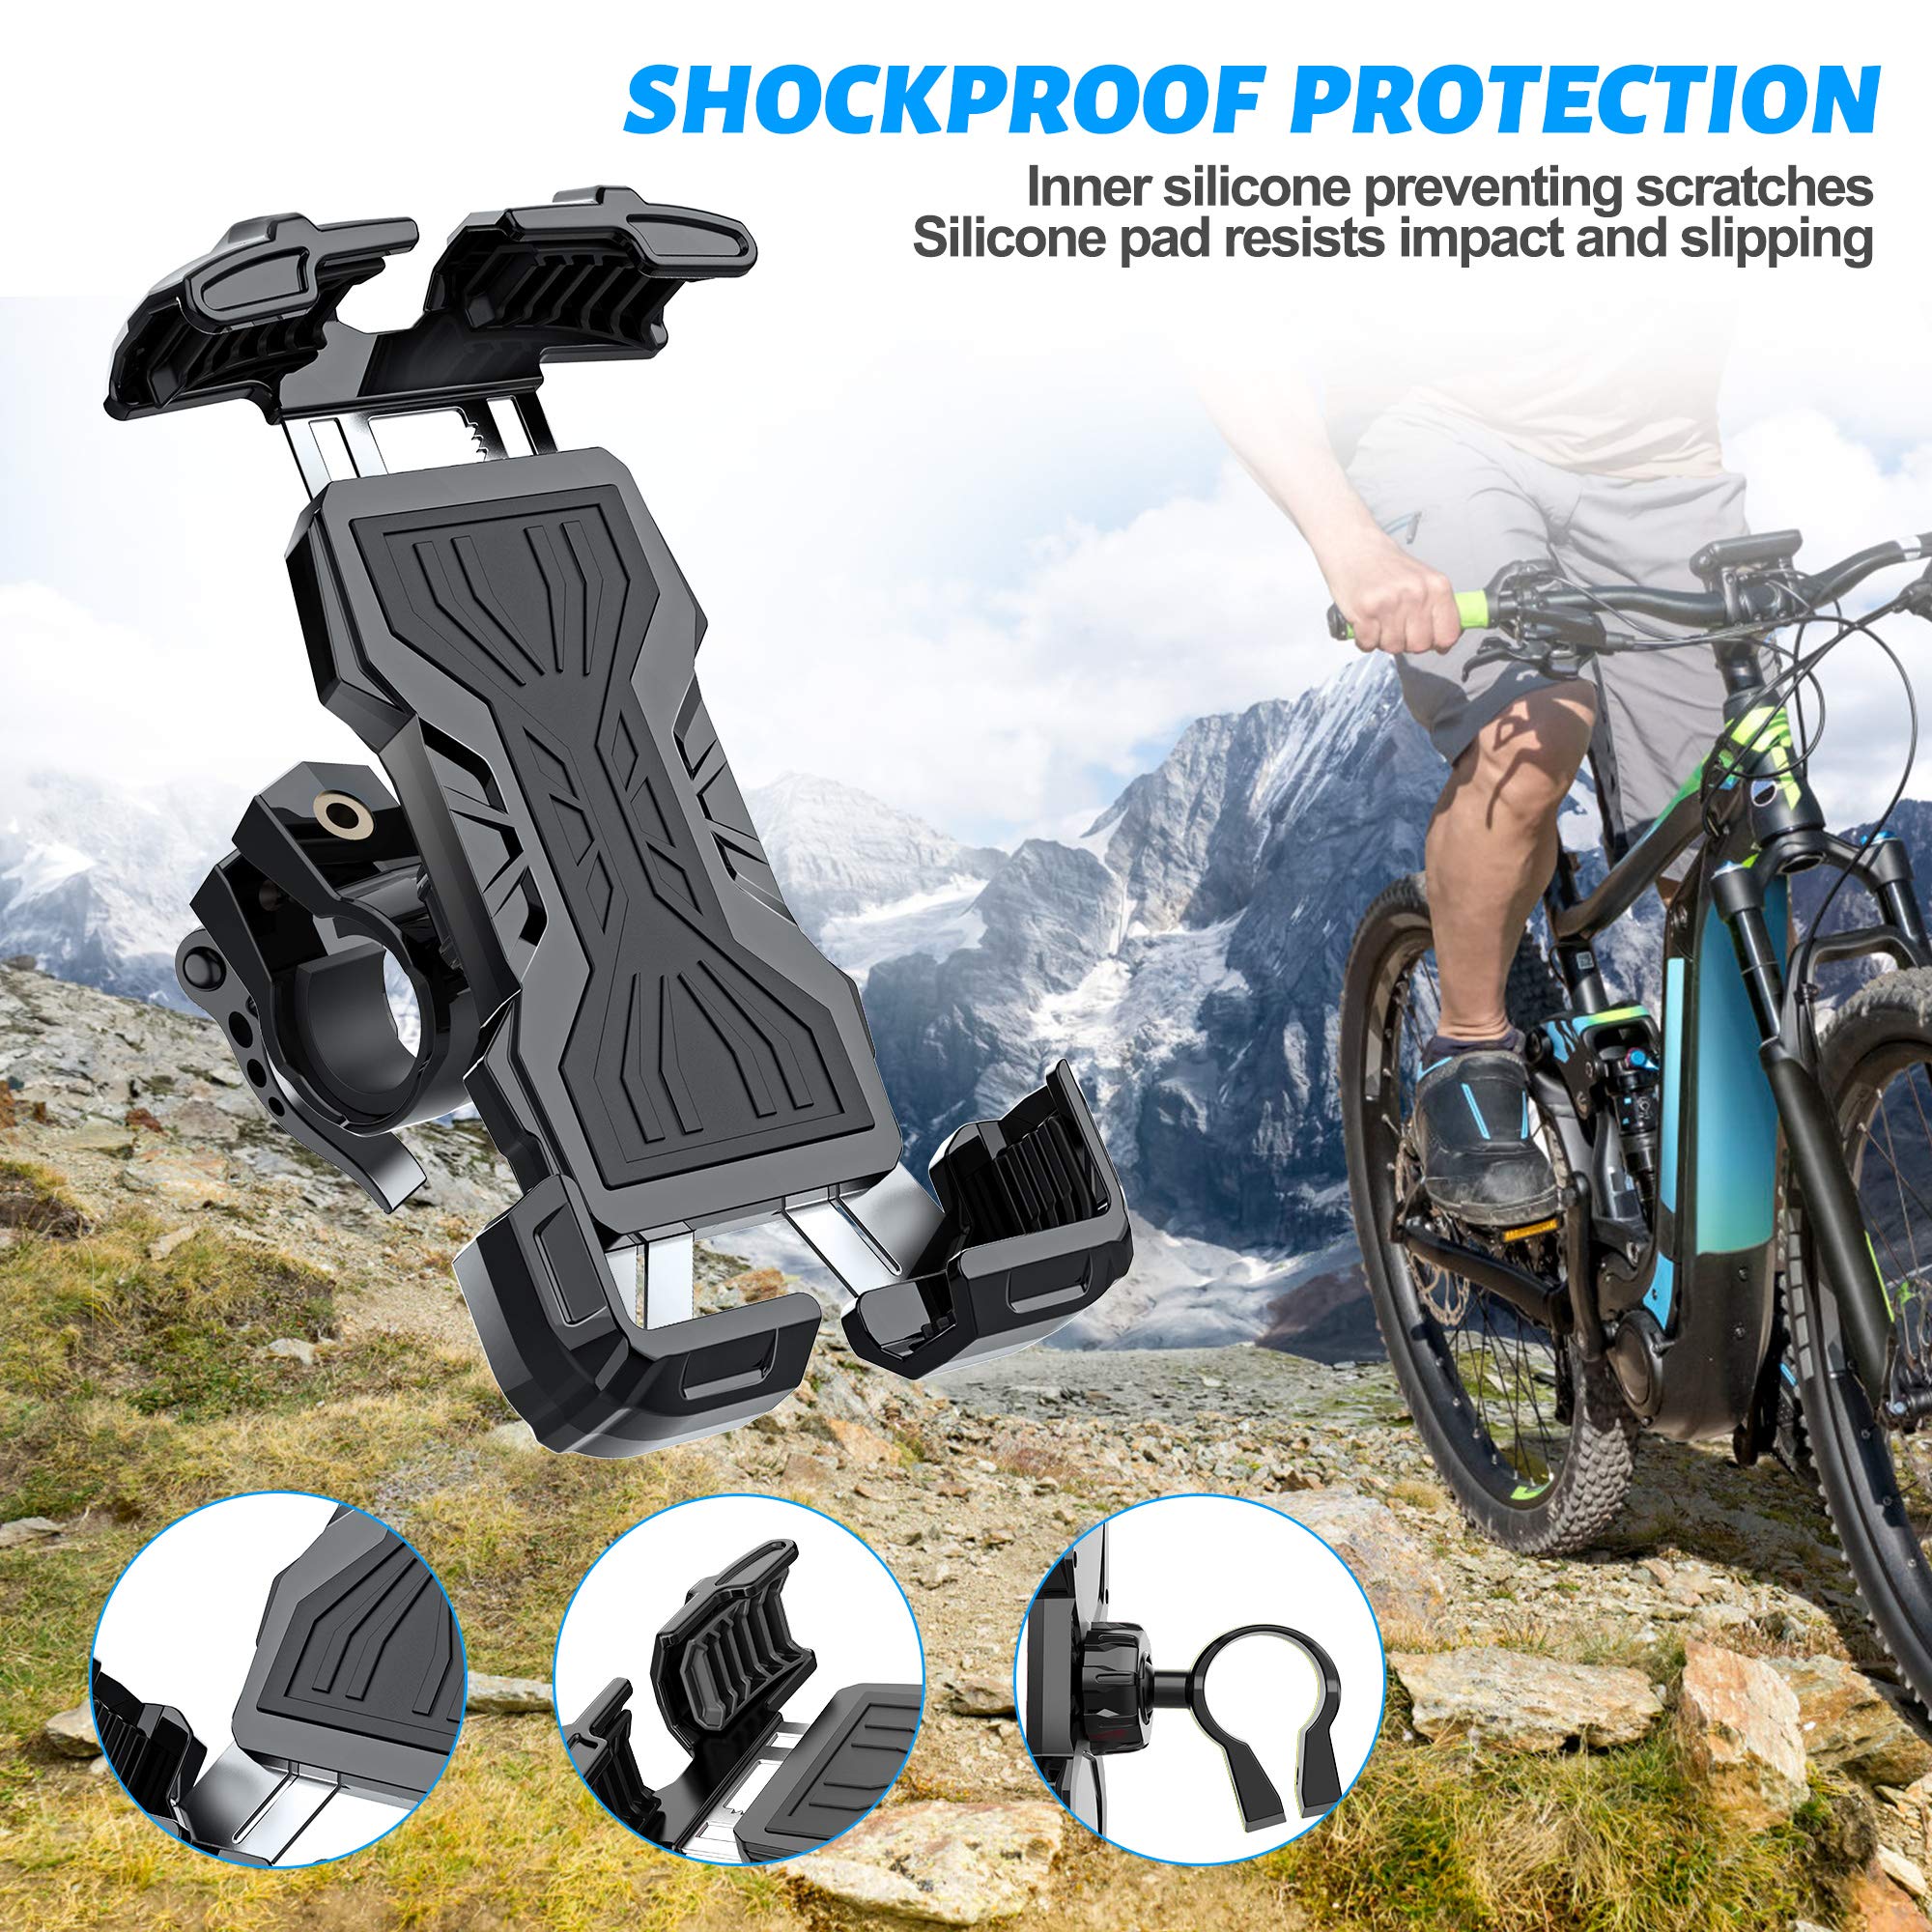 Bike Phone Mount, All-Round Adjustble Motorcycle Phone Mount, Bike Phone Holder for Handlebars Fits iPhone 12 Pro Max/11 Pro/XR/XS MAX,Galaxy S20/S10/Note 10 and All 4.7-6.8inches Devices